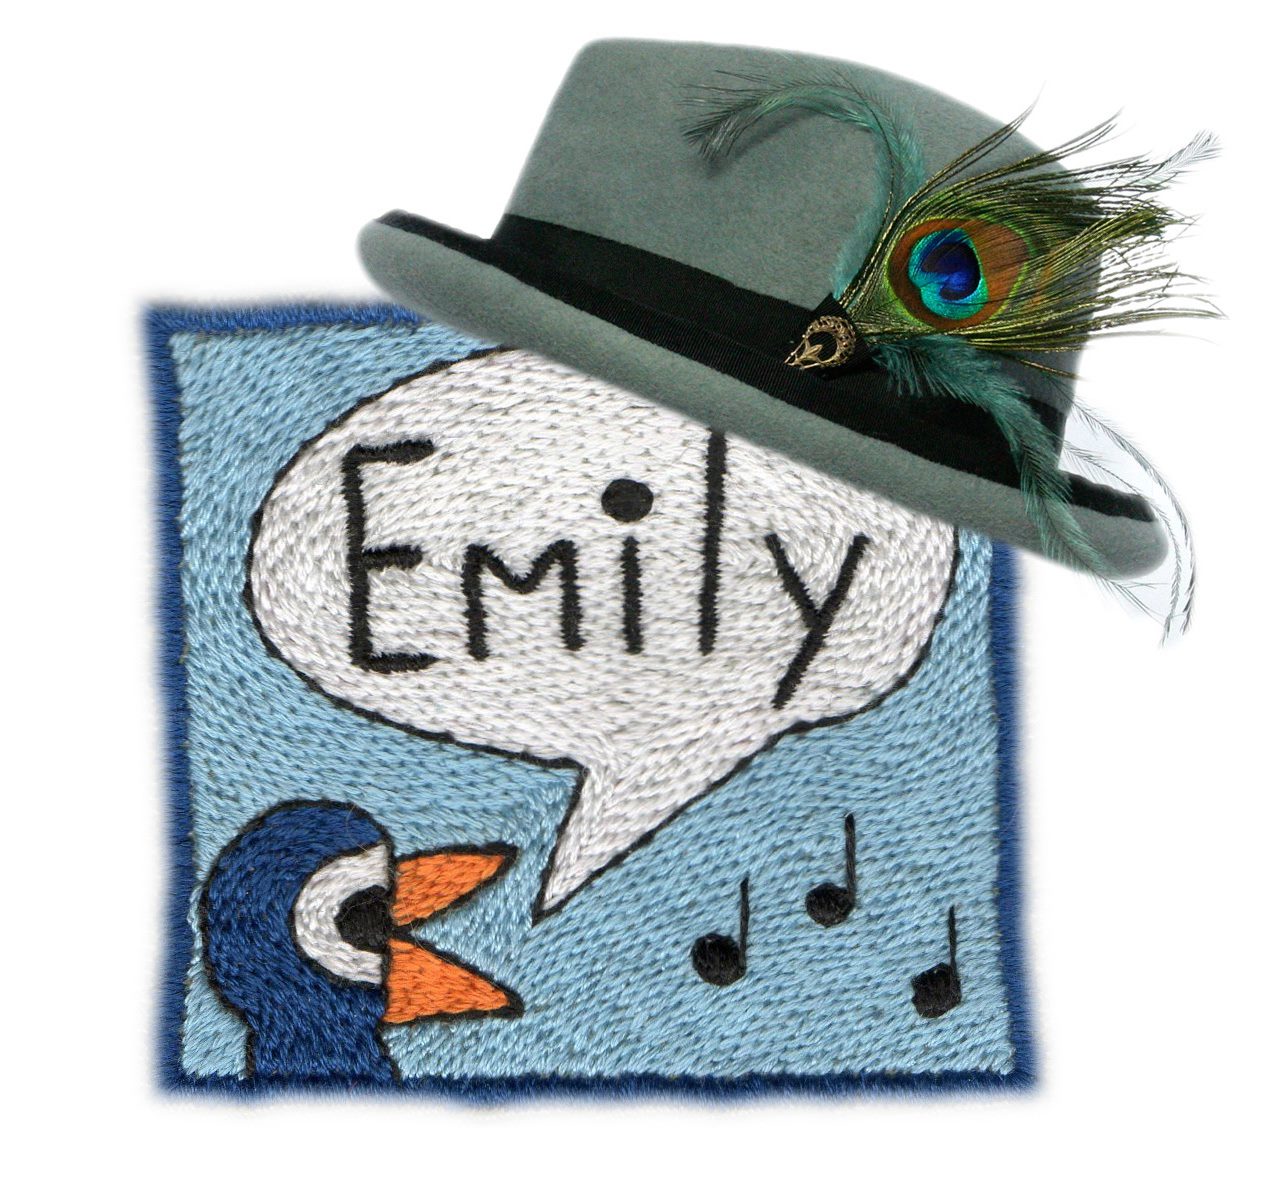 Emily Moe, Milliner and author of the Millinery Operations for Mr X Stitch